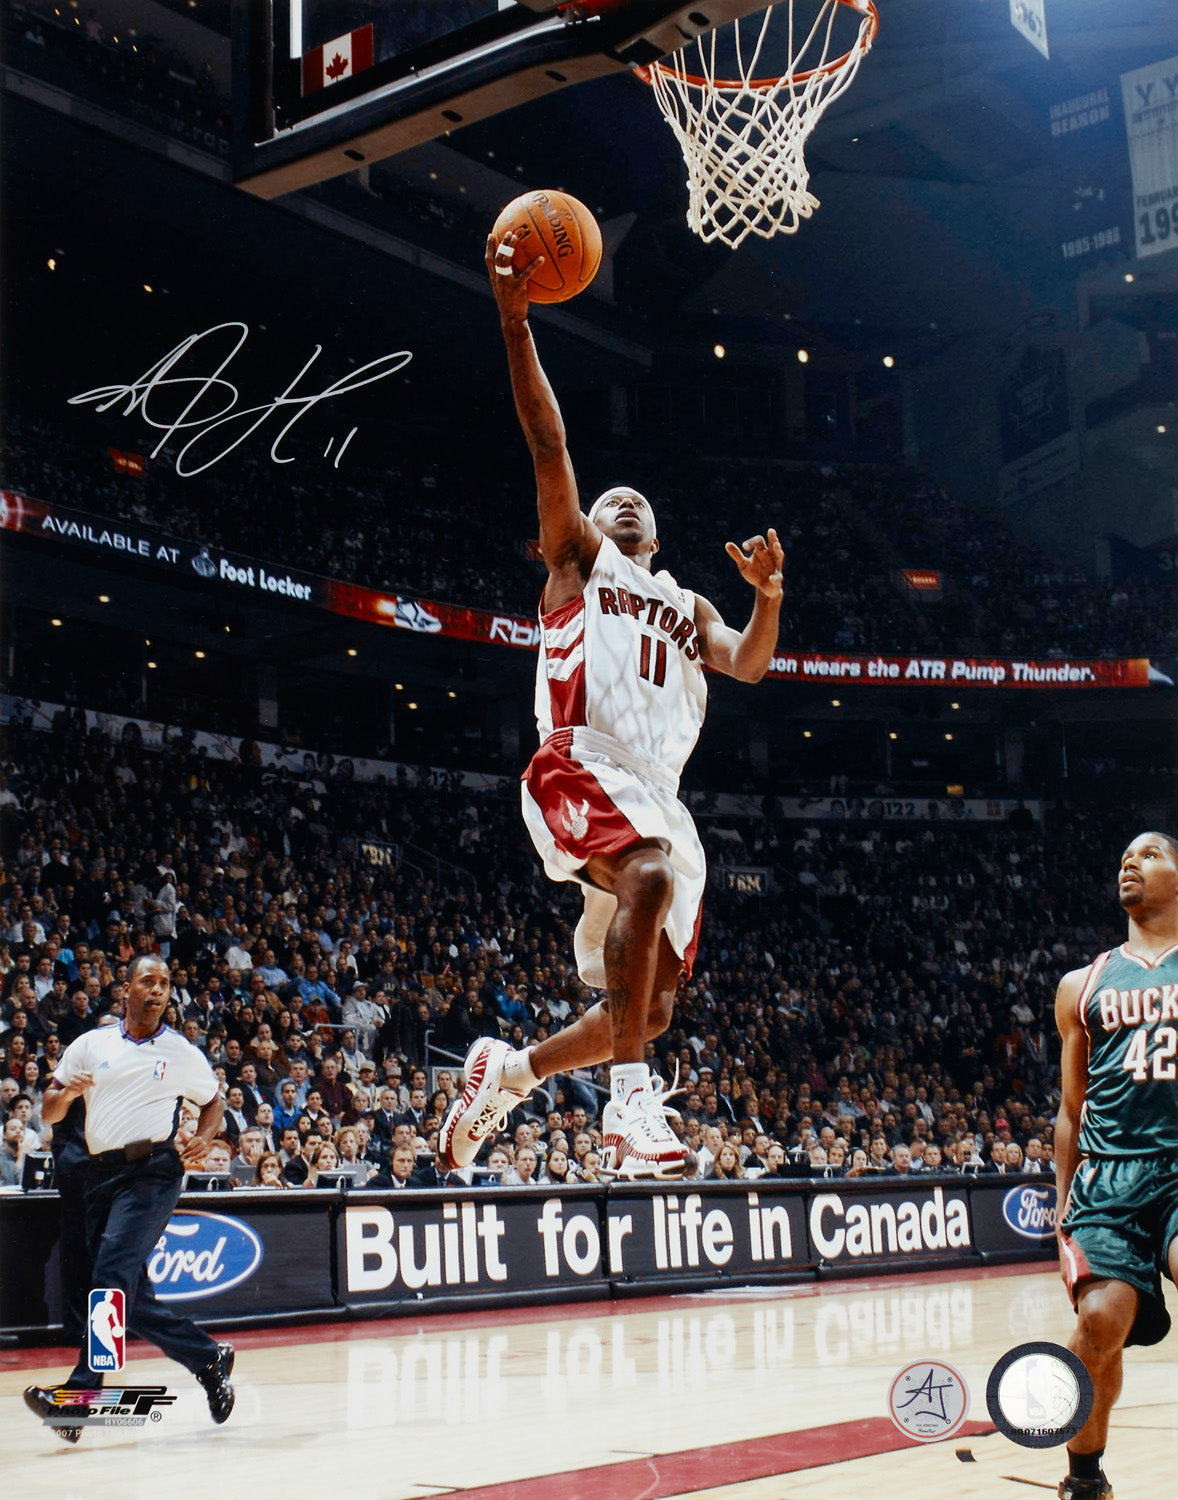 TJ Ford Signed Raptors Life In Canada 11x14 Photo